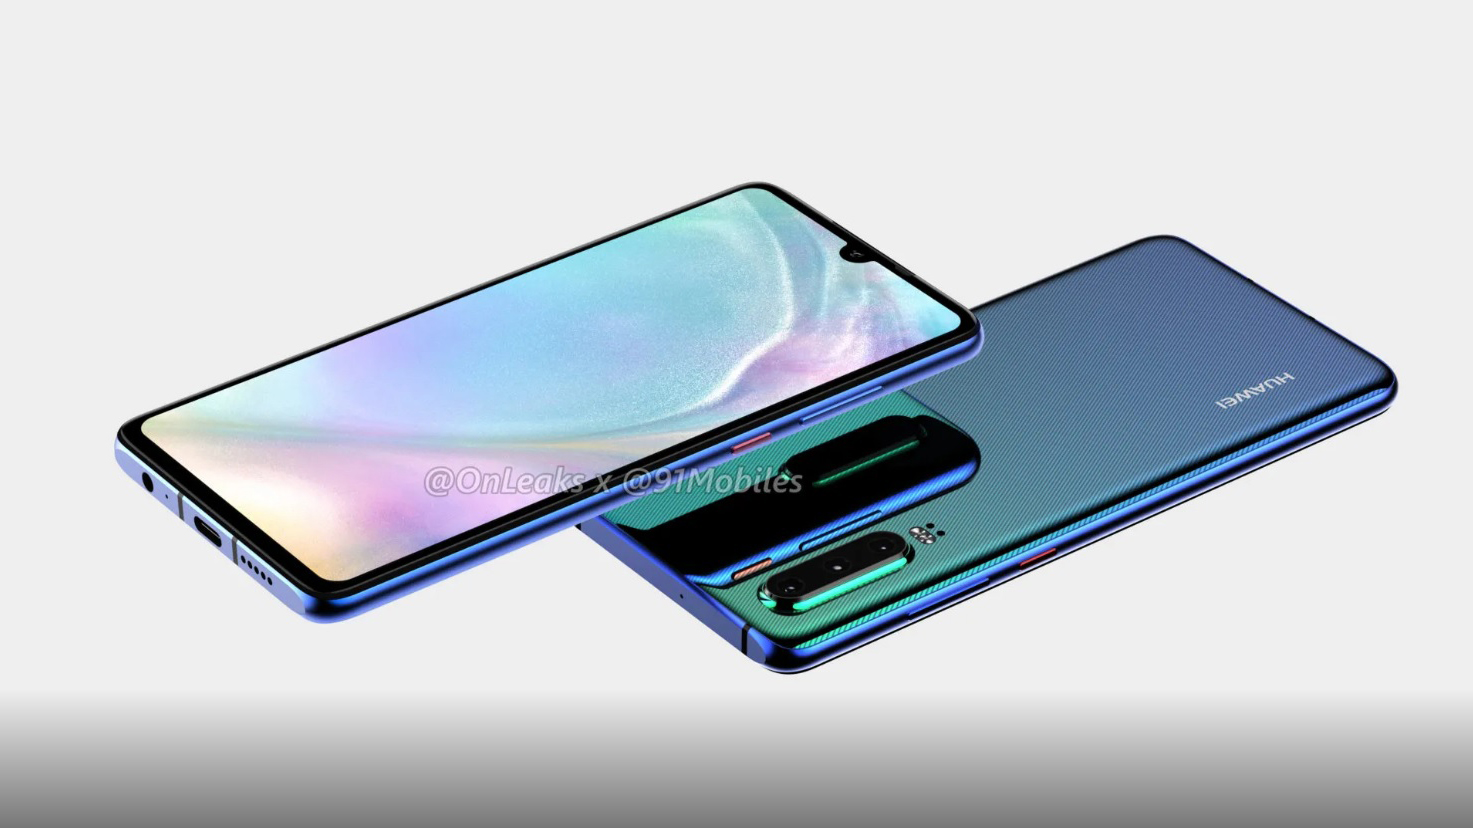 A rendered image of the HUAWEI P30 includes a headphone jack, no more USB-C headphones.